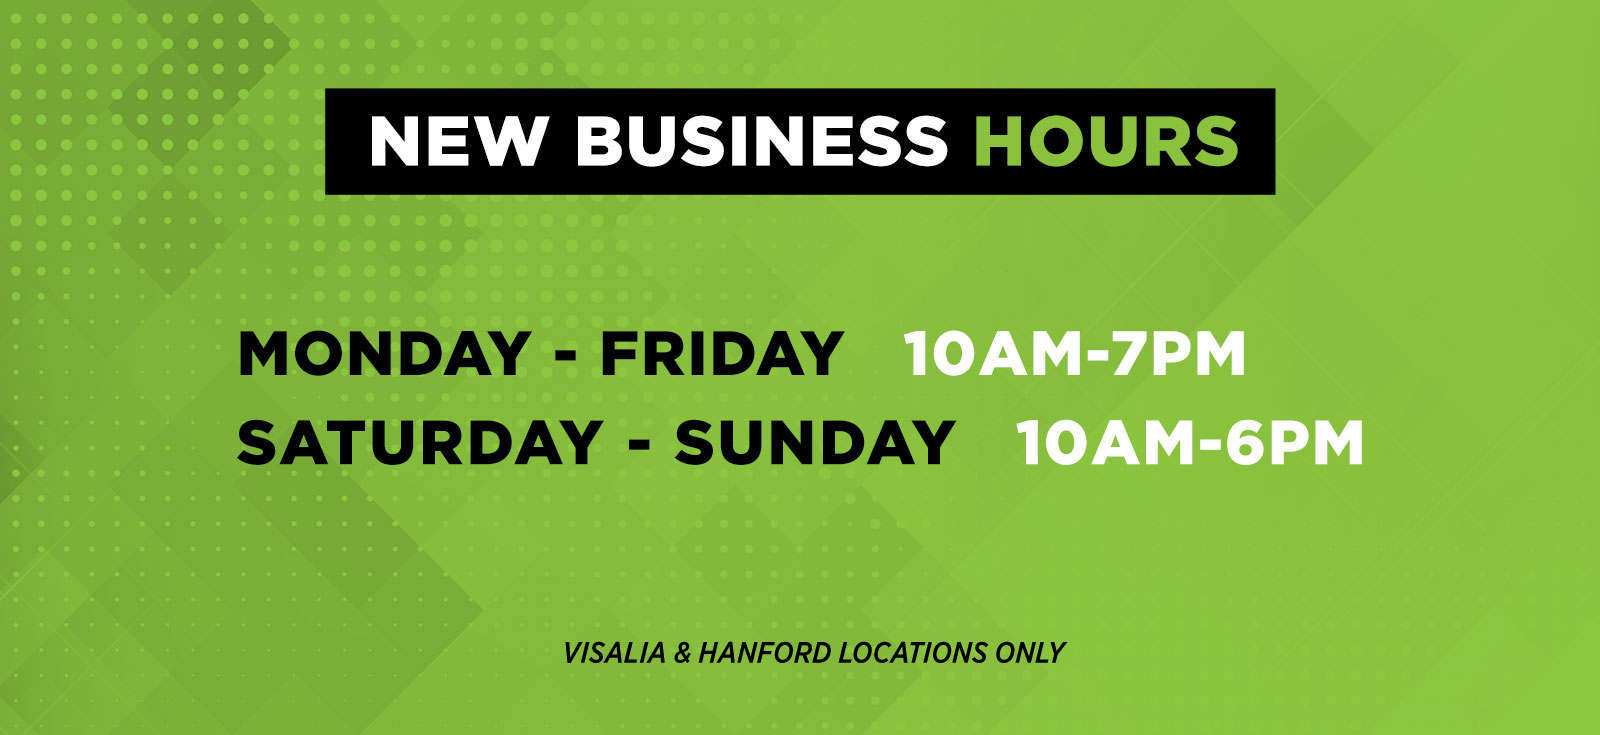 New-Business-Hours